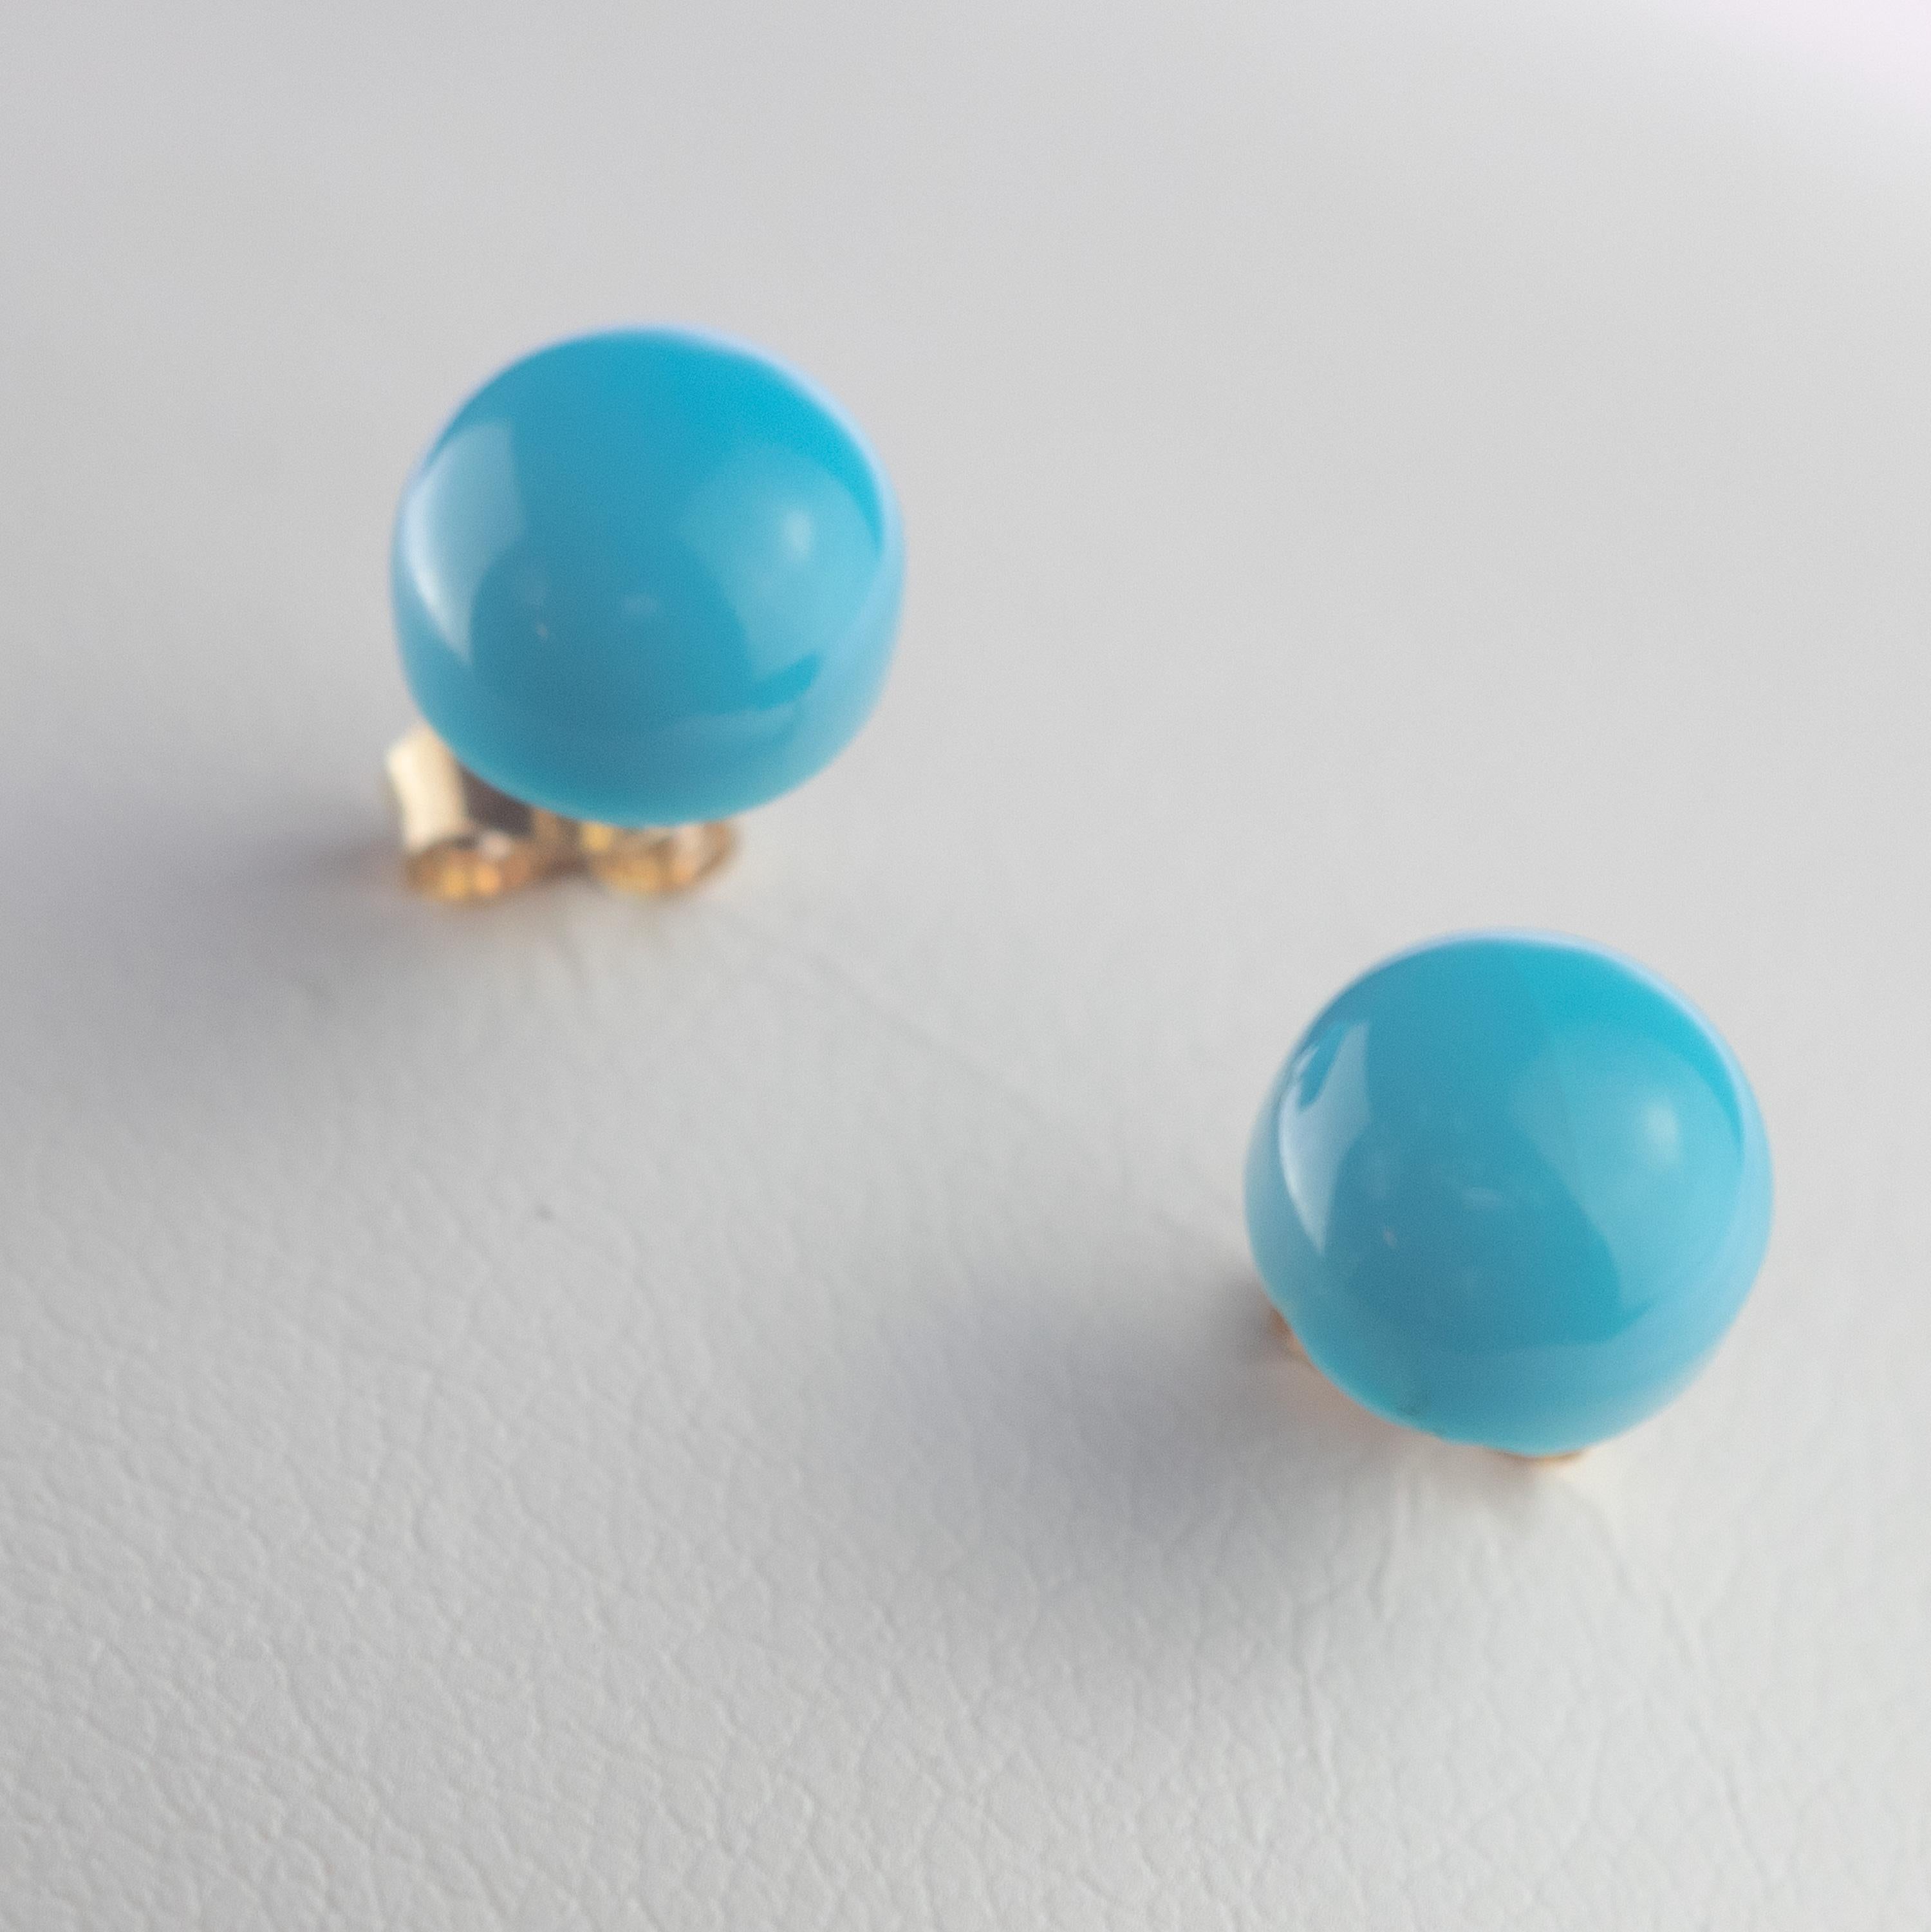 Round Cut Natural Turquoise Round Cabochon 14 Karat Gold Stud Chic Cocktail Earrings For Sale